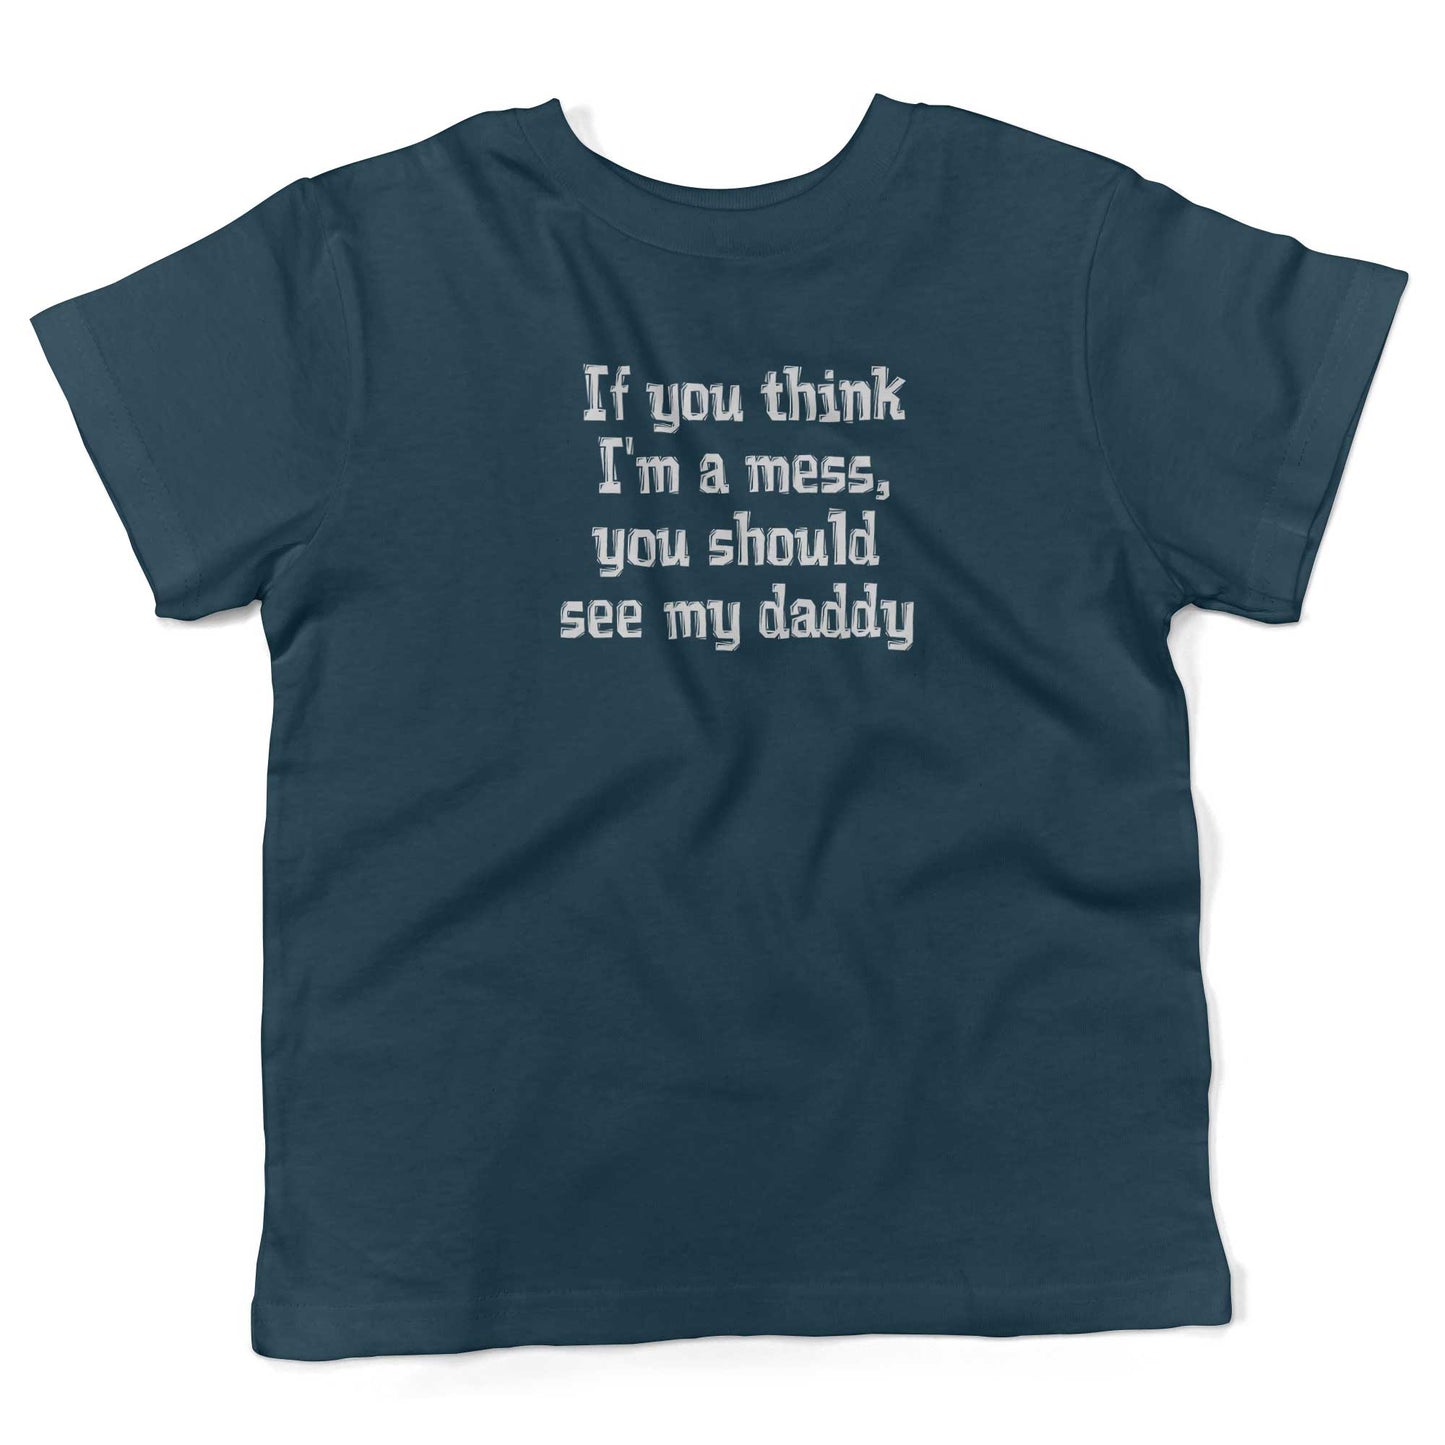 If You Think I'm A Mess, You Should See My Daddy Toddler Shirt-Organic Pacific Blue-2T